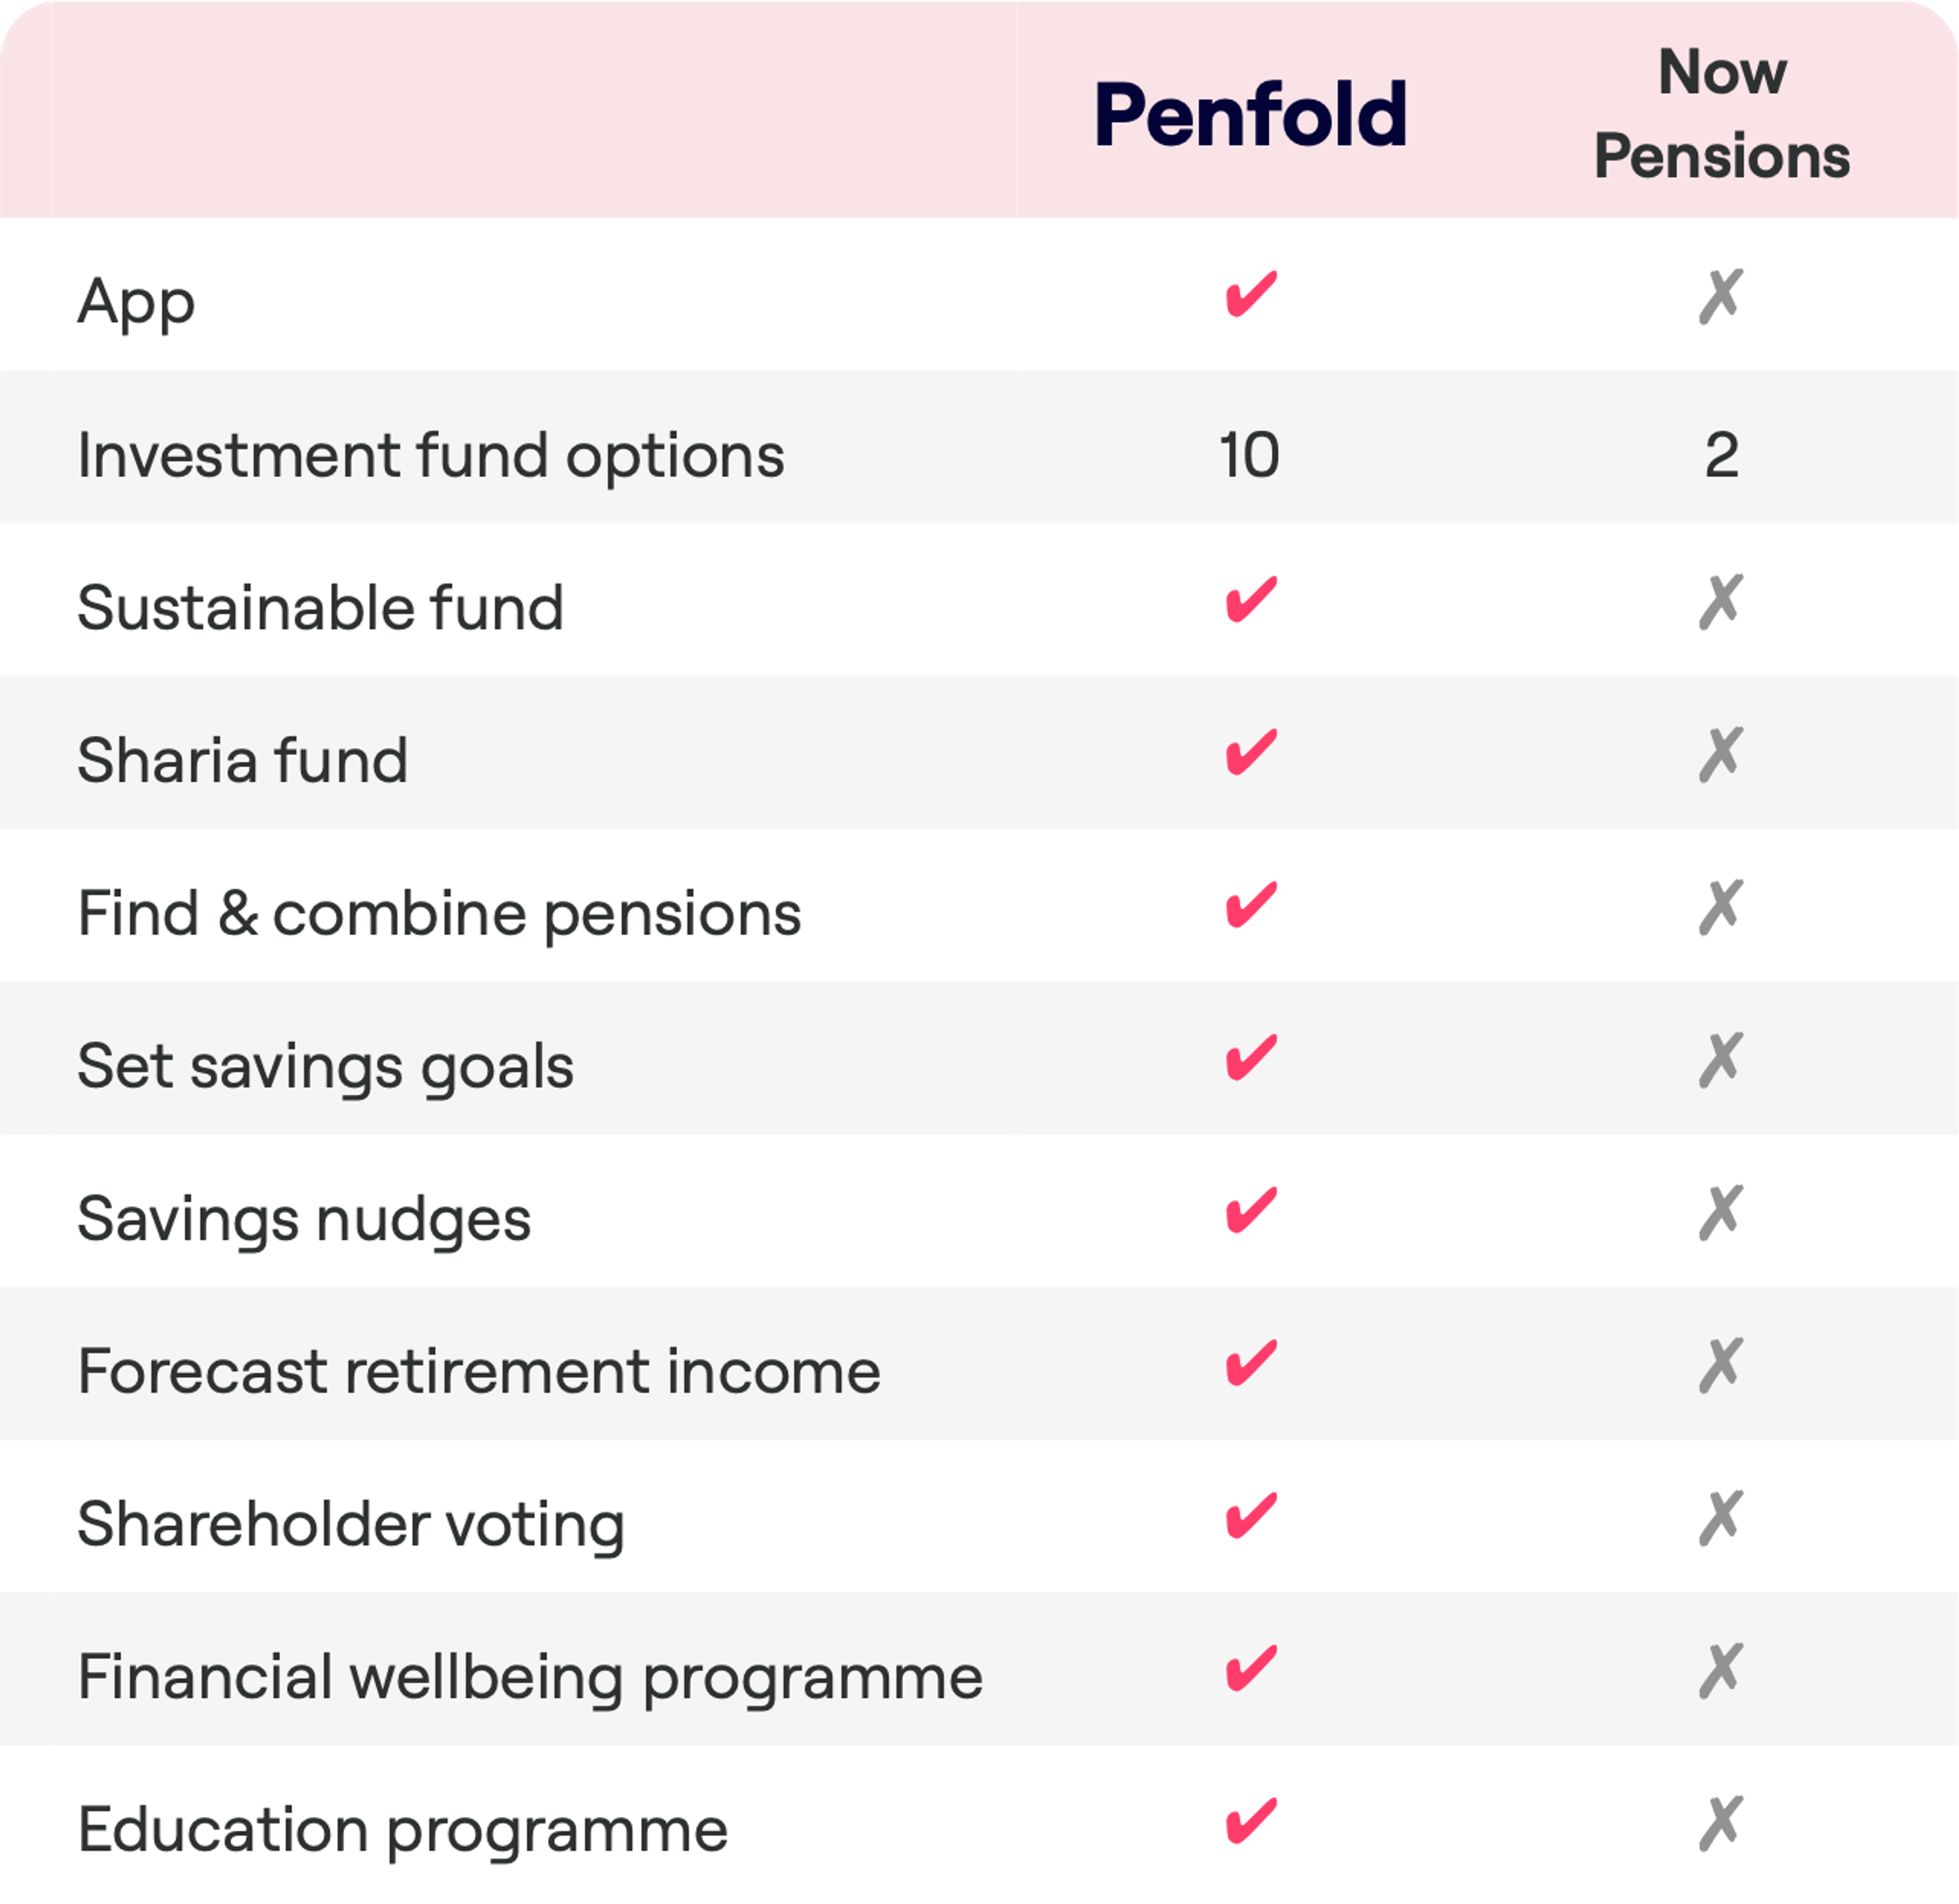 A feature comparison chart for Penfold and Now Pensions. Penfold offers a mobile app, 10 investment fund options, a sustainable fund, a Sharia fund, pension finding and combining, savings goal setting, savings nudges, retirement income forecasting, shareholder voting, a financial wellbeing programme, and an education programme. Now Pensions does not offer an app, has 2 investment fund options, and lacks the additional features provided by Penfold.